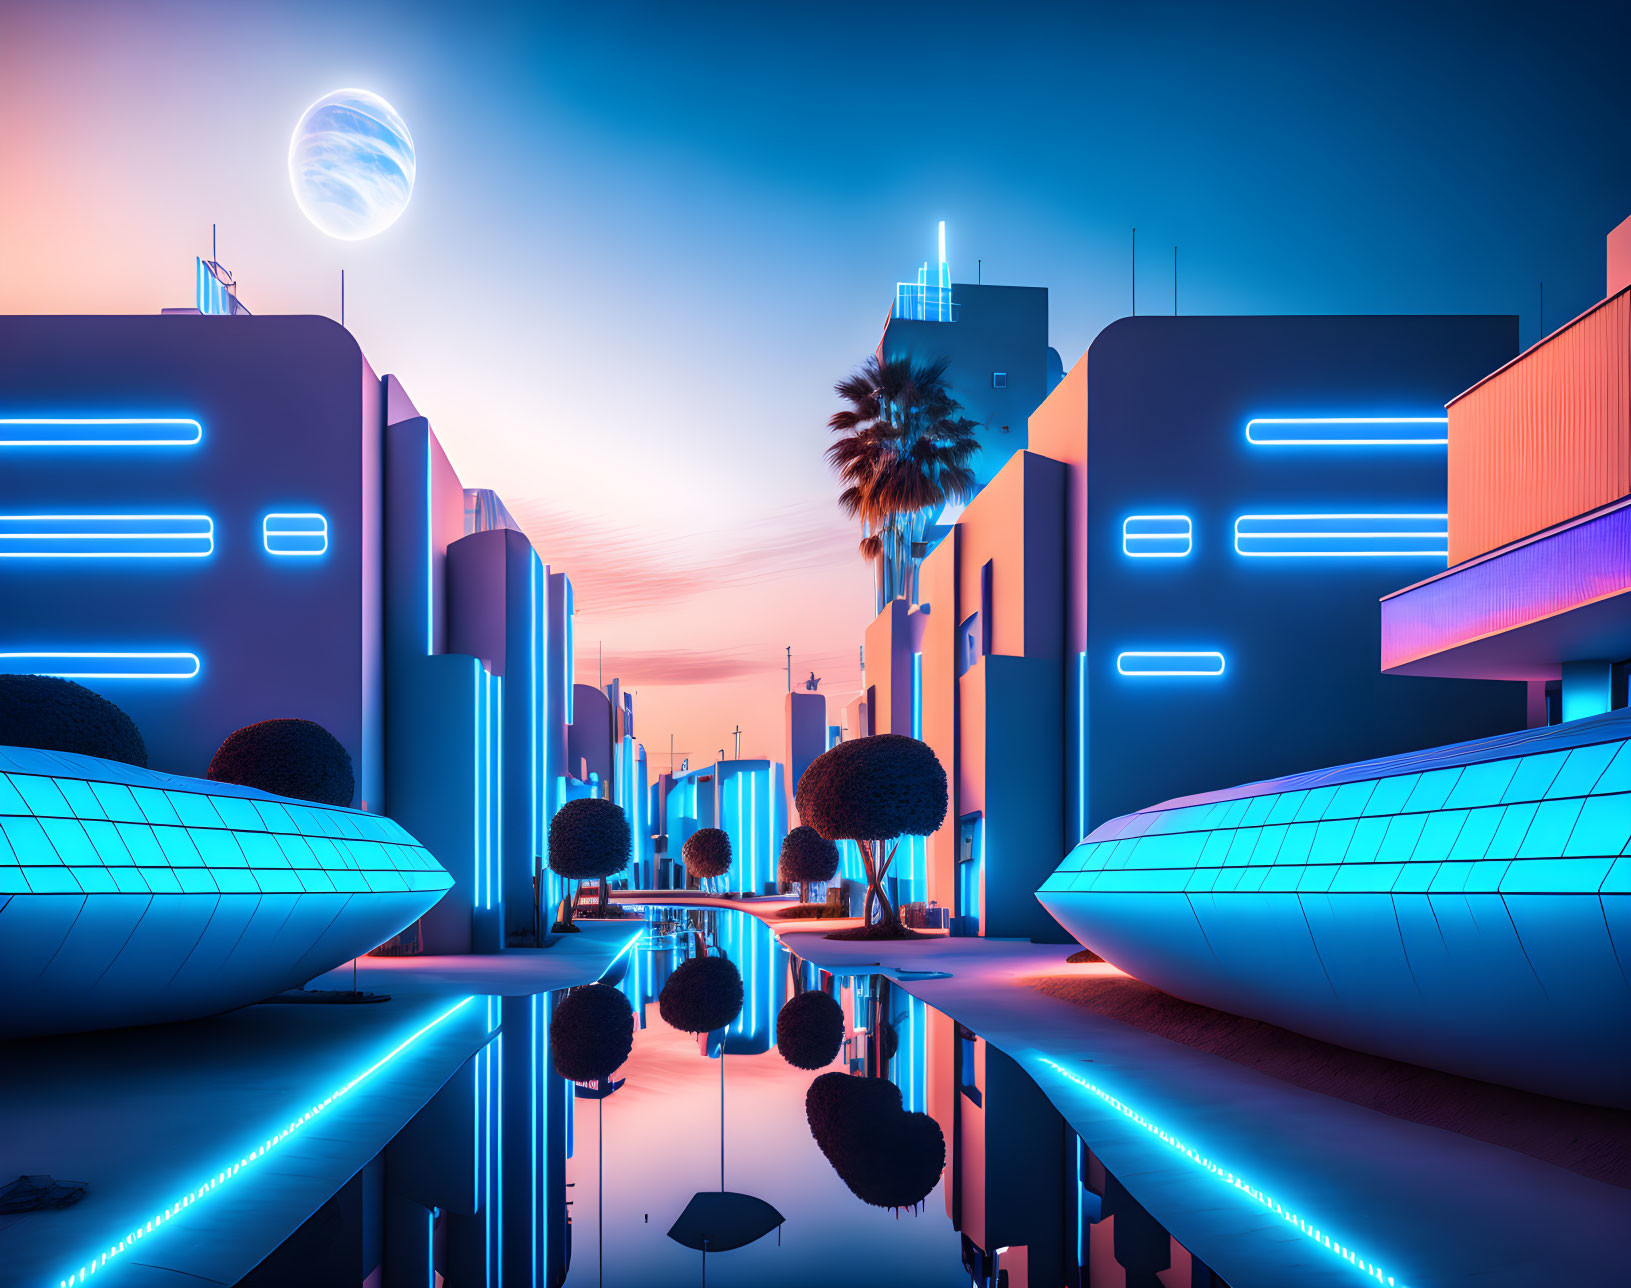 Futuristic cityscape with neon lights, sleek buildings, water reflections, palm trees, and moon